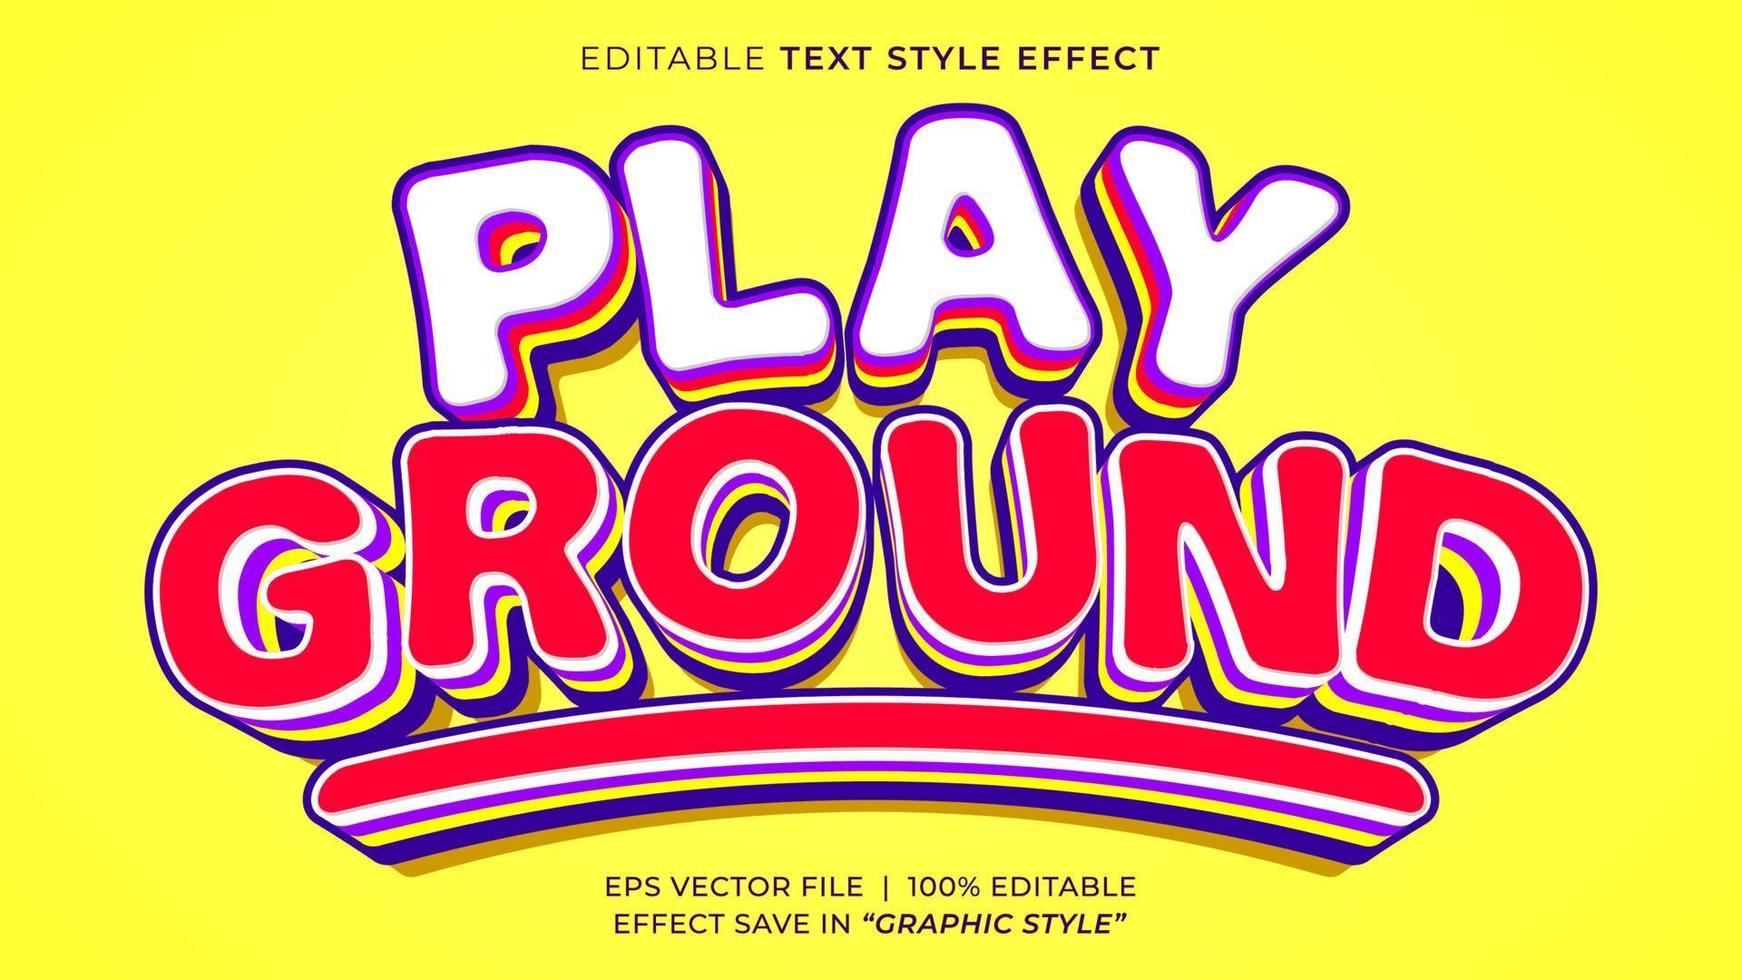 Playground kids 3D editable text effect template vector